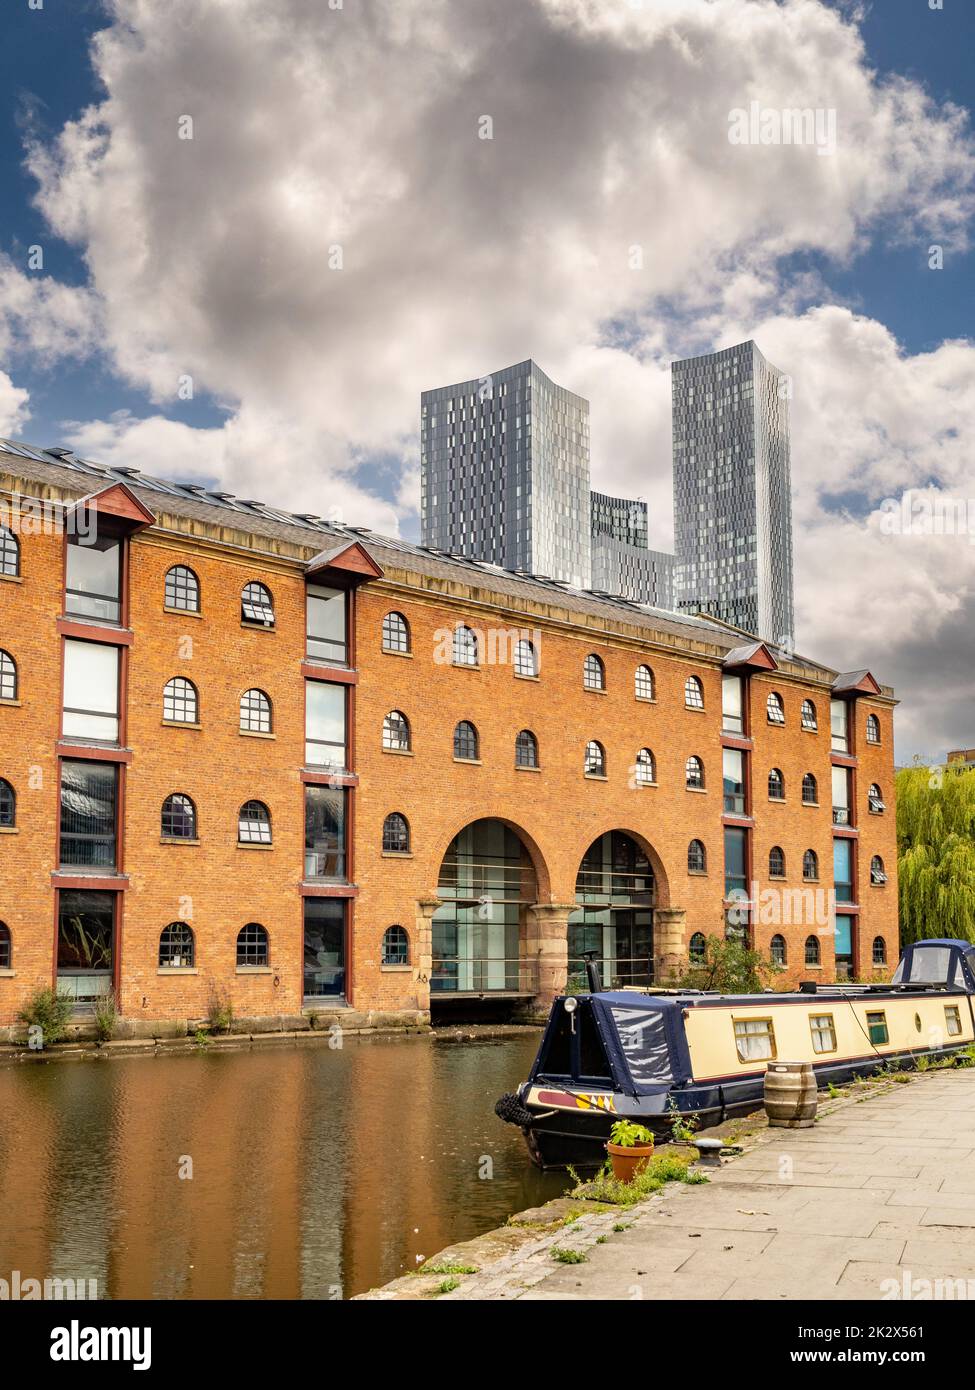 Bridgewater canal alongside Merchants Warehouse, with the four towers of Deansgate Square in the distance. Stock Photo